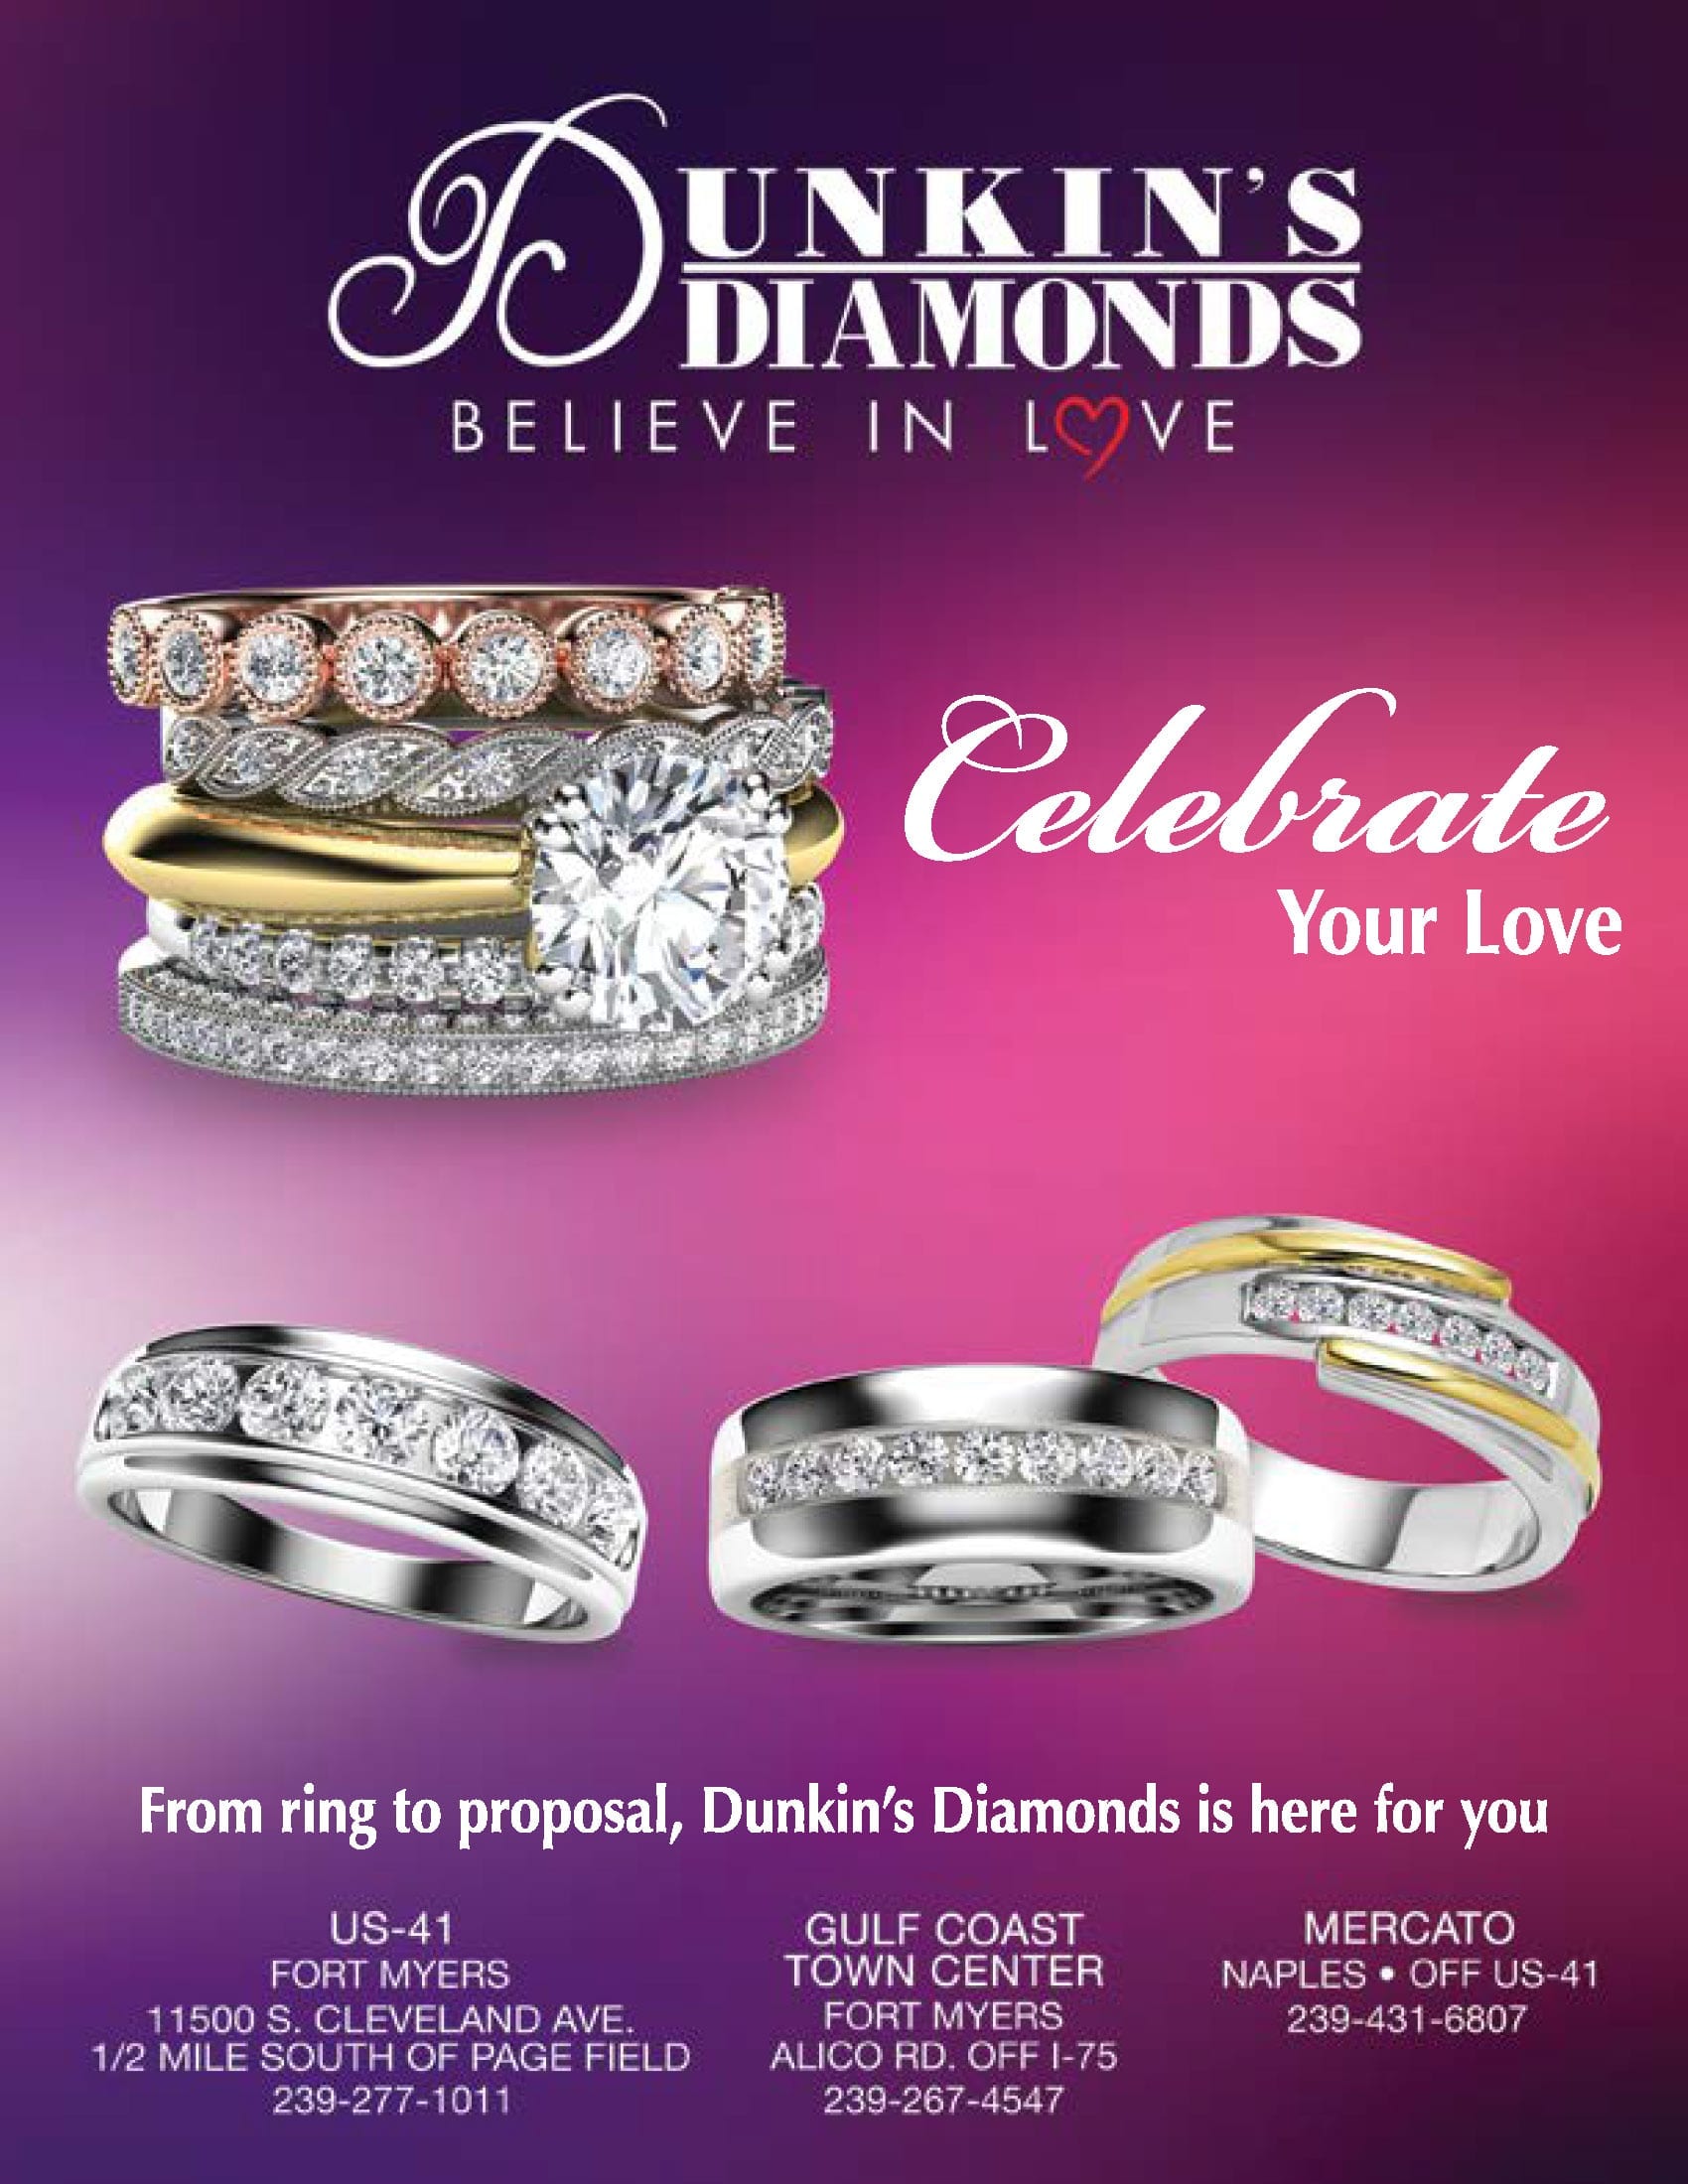 Best Jewelers in Fort Myers, FL and Naples, FL, providing engagement rings and wedding rings